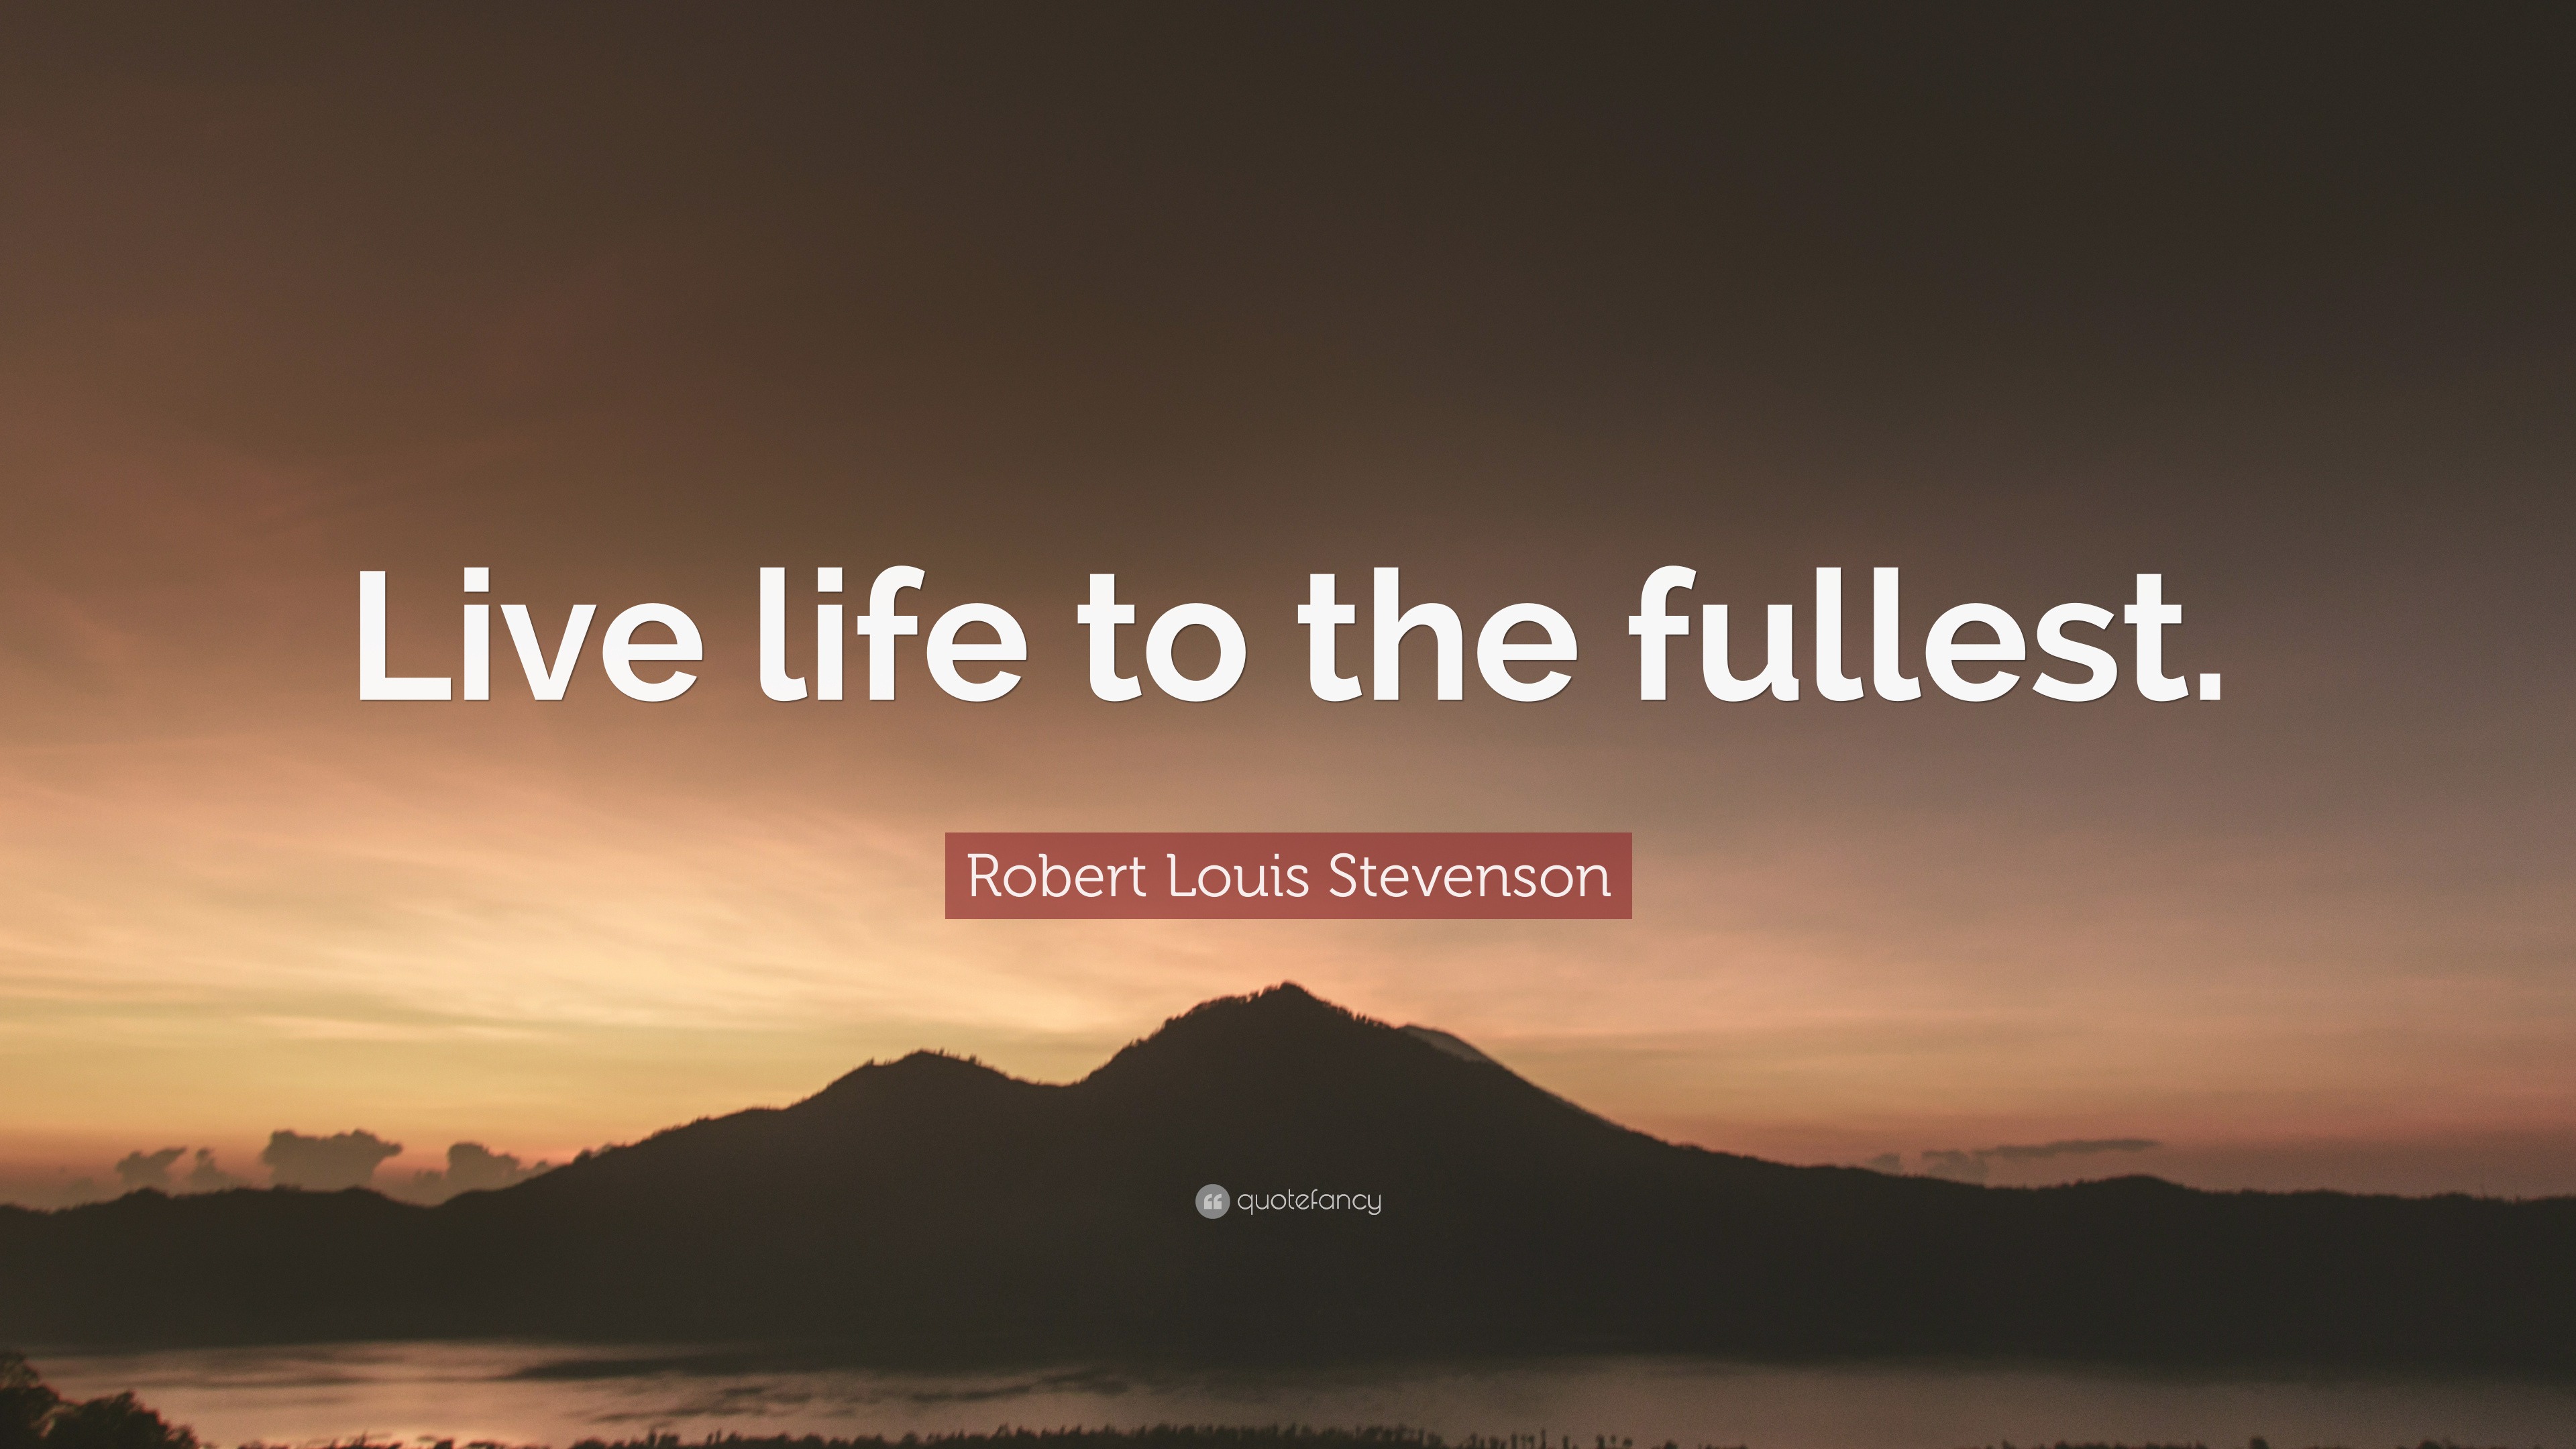 Robert Louis Stevenson Quote: “Live life to the fullest.” (7 wallpapers ...